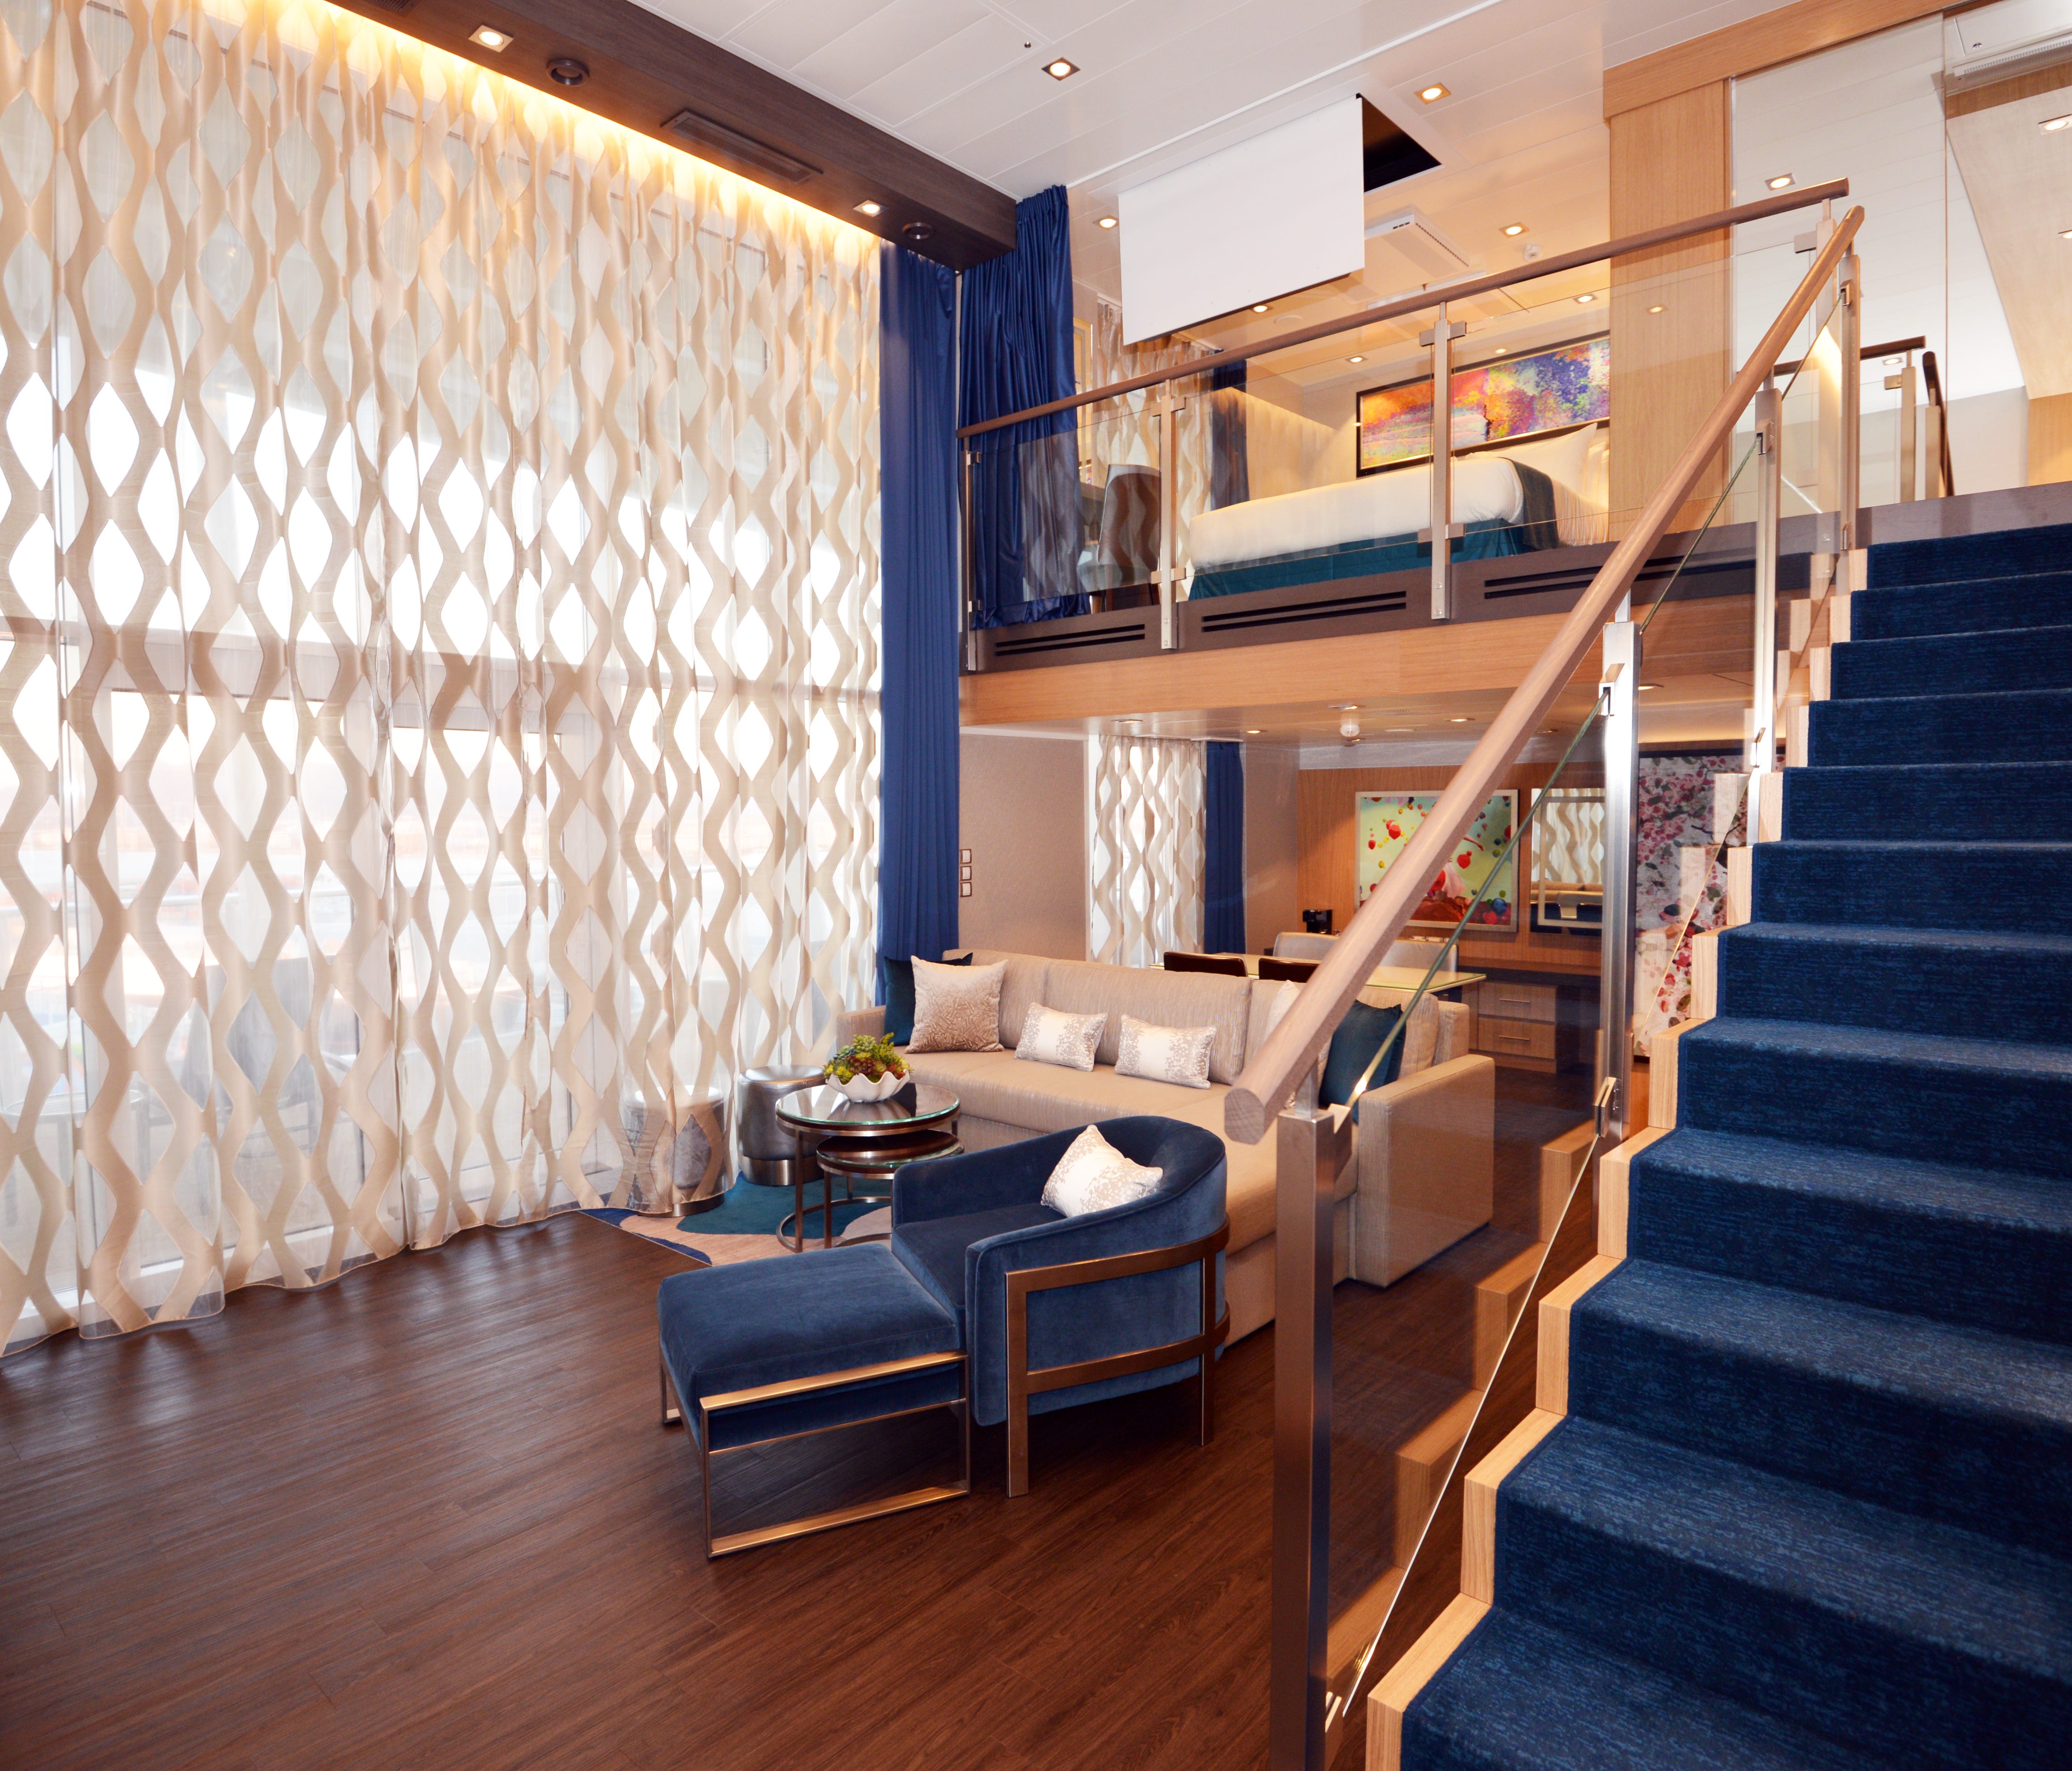 Another large suite on Symphony of the Seas is the Star Loft Suite, which measures 722 square feet. Like the Royal Loft Suite, it is two decks high.